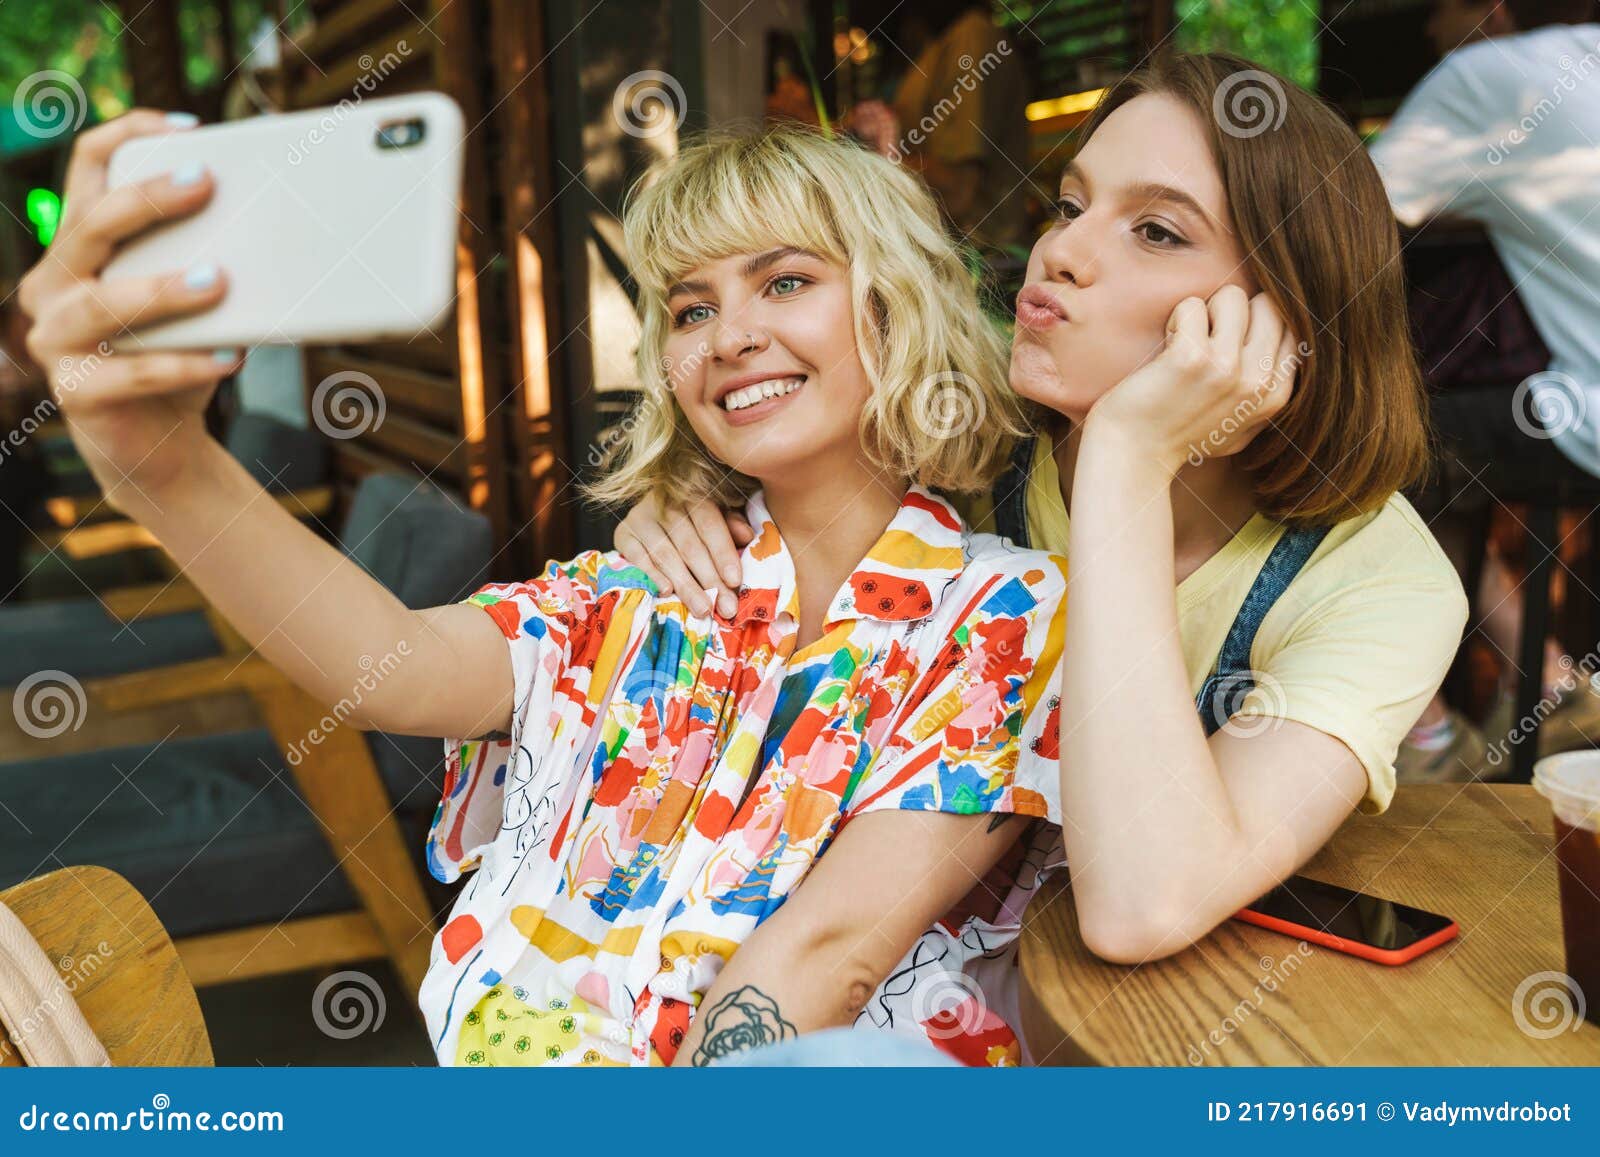 Image of Two Women Taking Selfie on Cellphone while Sitting in Cafe ...